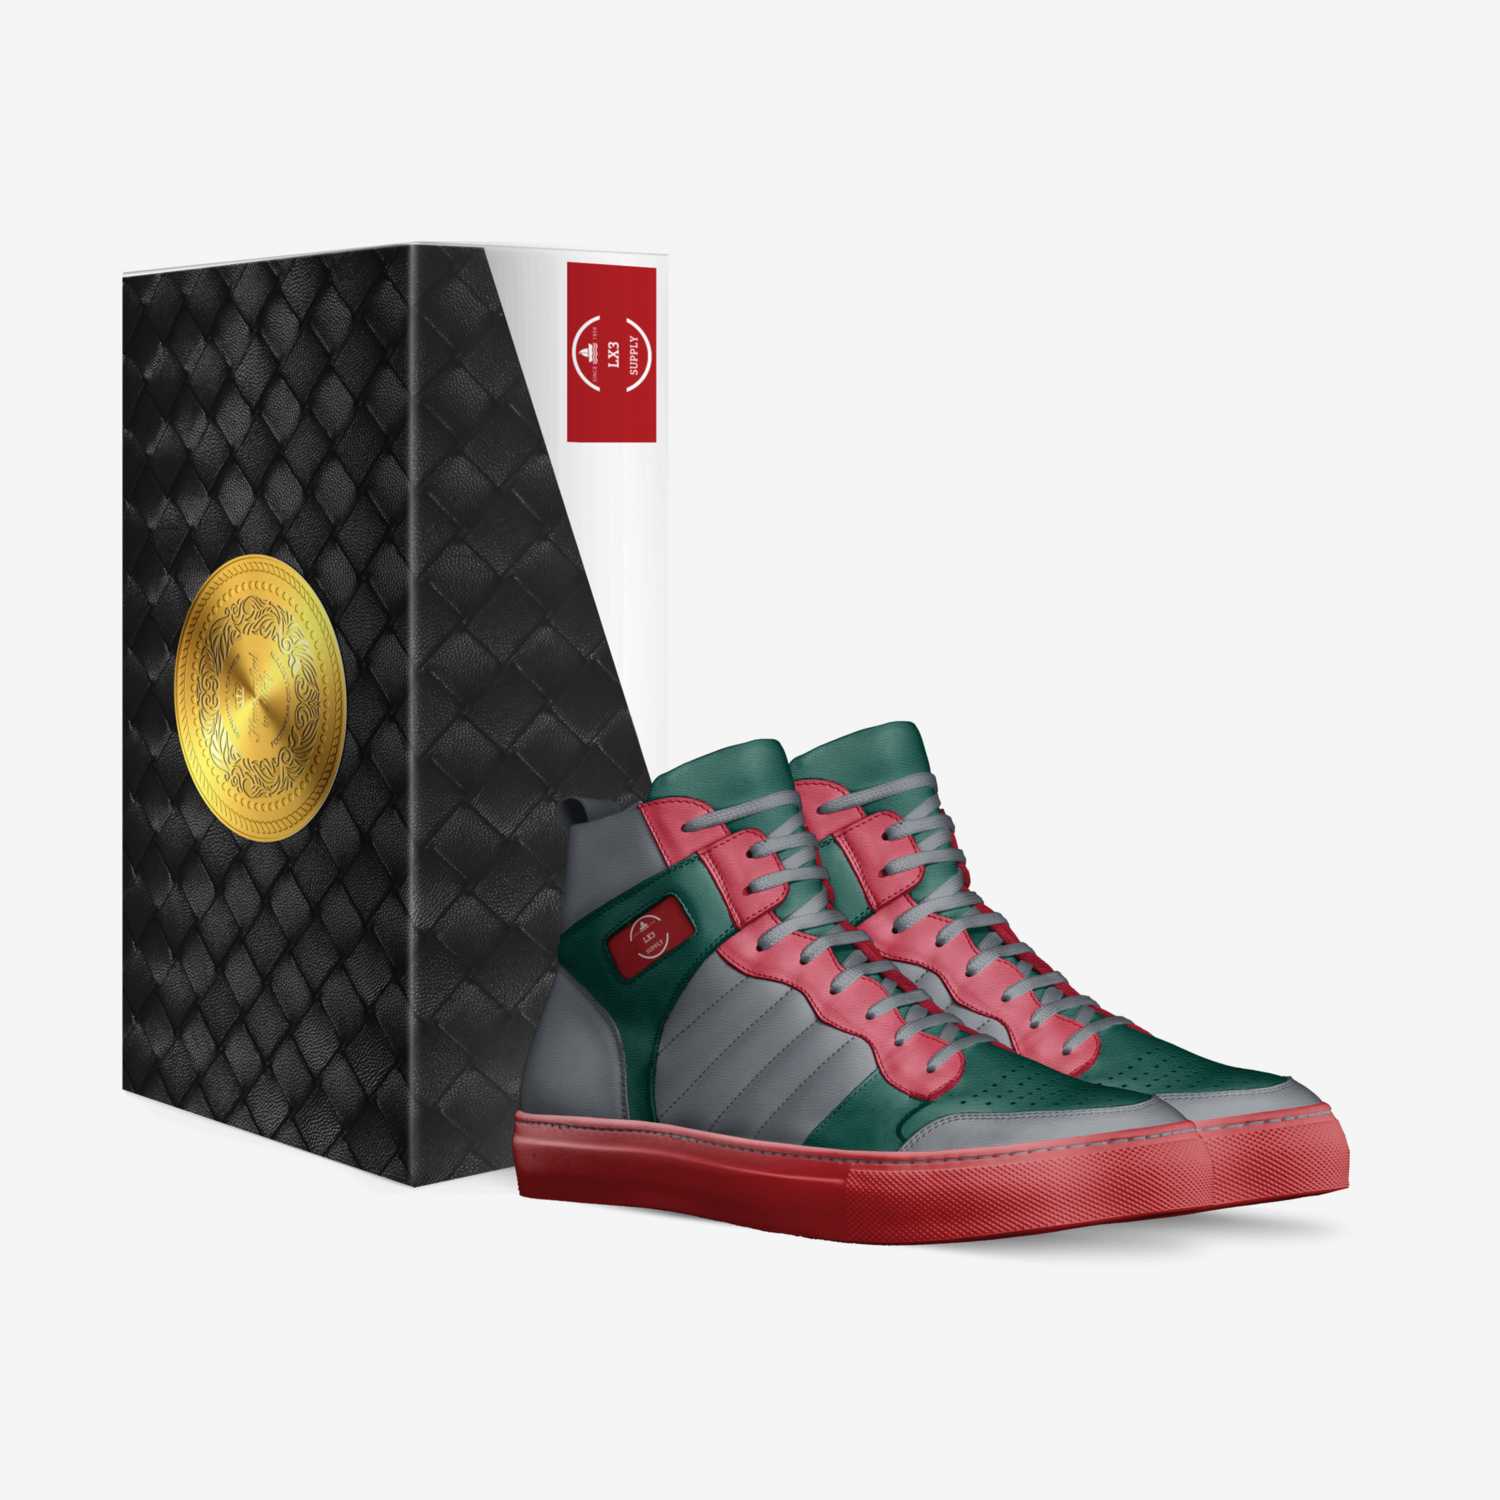 LX3 custom made in Italy shoes by Anthony Thompson | Box view